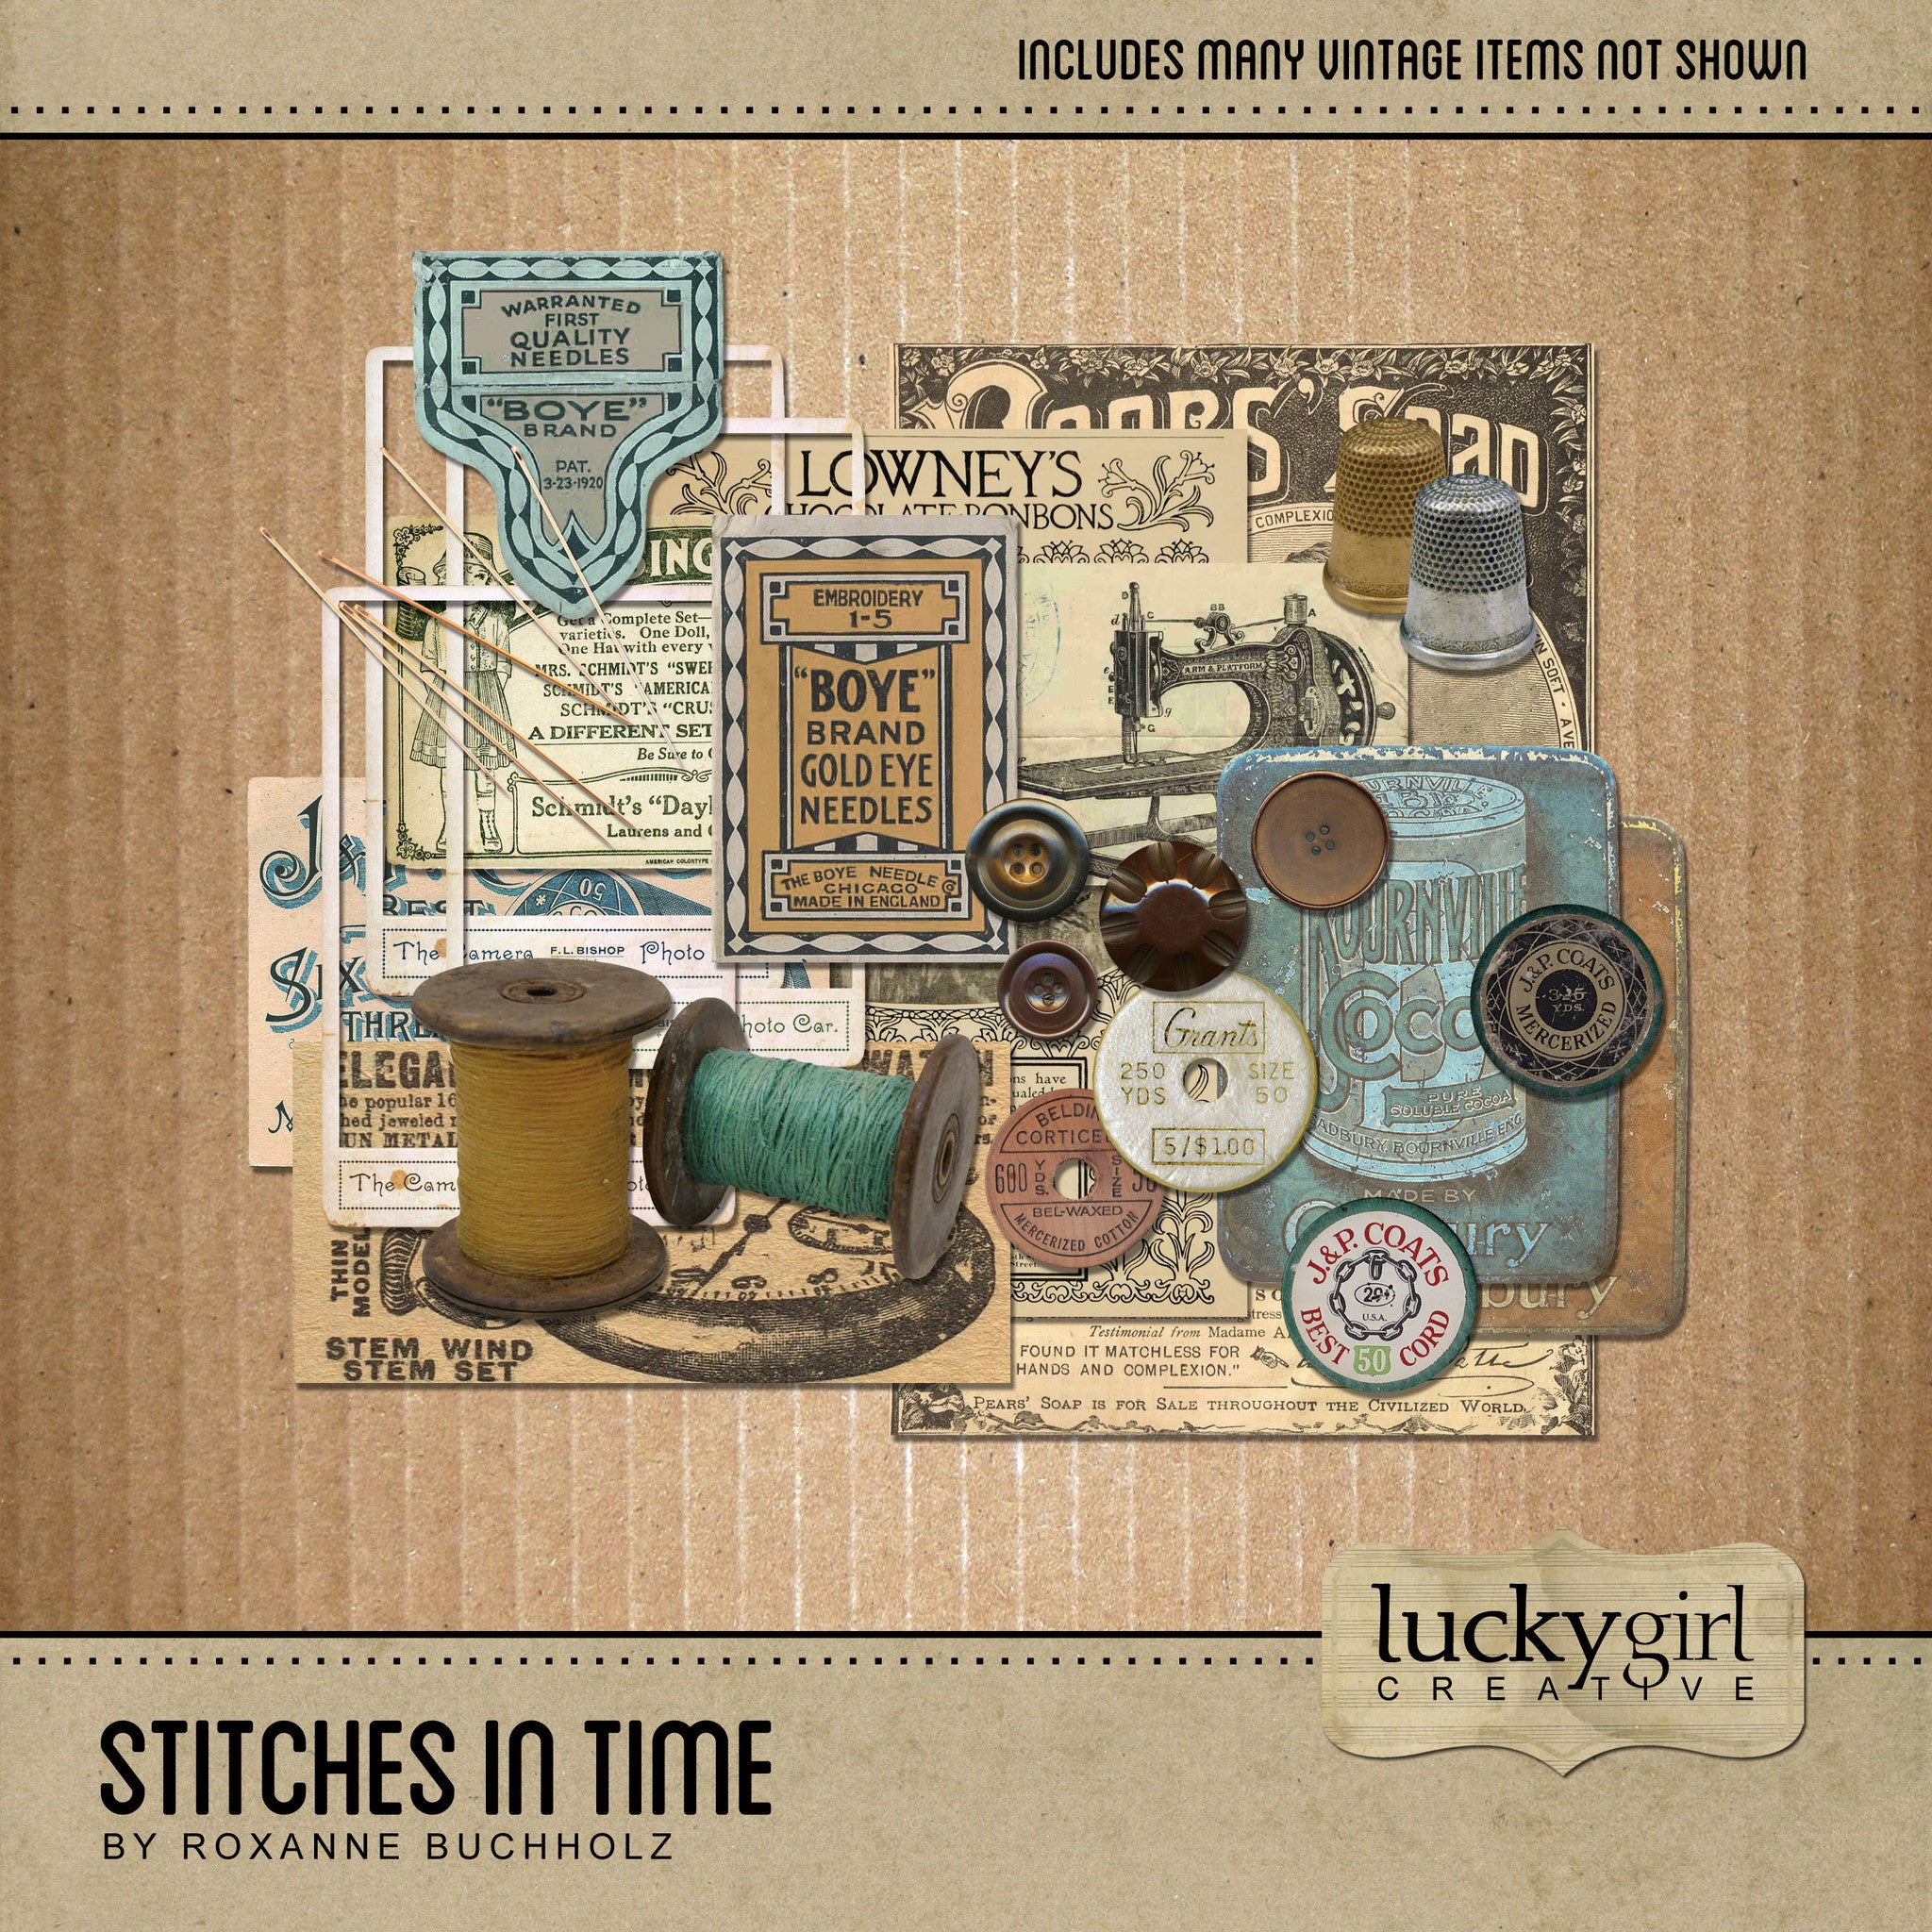 The Stitches in Time Digital Scrapbook Kit features many vintage newspaper advertisements, sewing needles, spools of thread, and antique frames. This digital art collection is perfect for family keepsake albums and genealogy research as it captures the times of the 1920’s - 1940’s and is neutral in its color palette with accents of turquoise and gold.